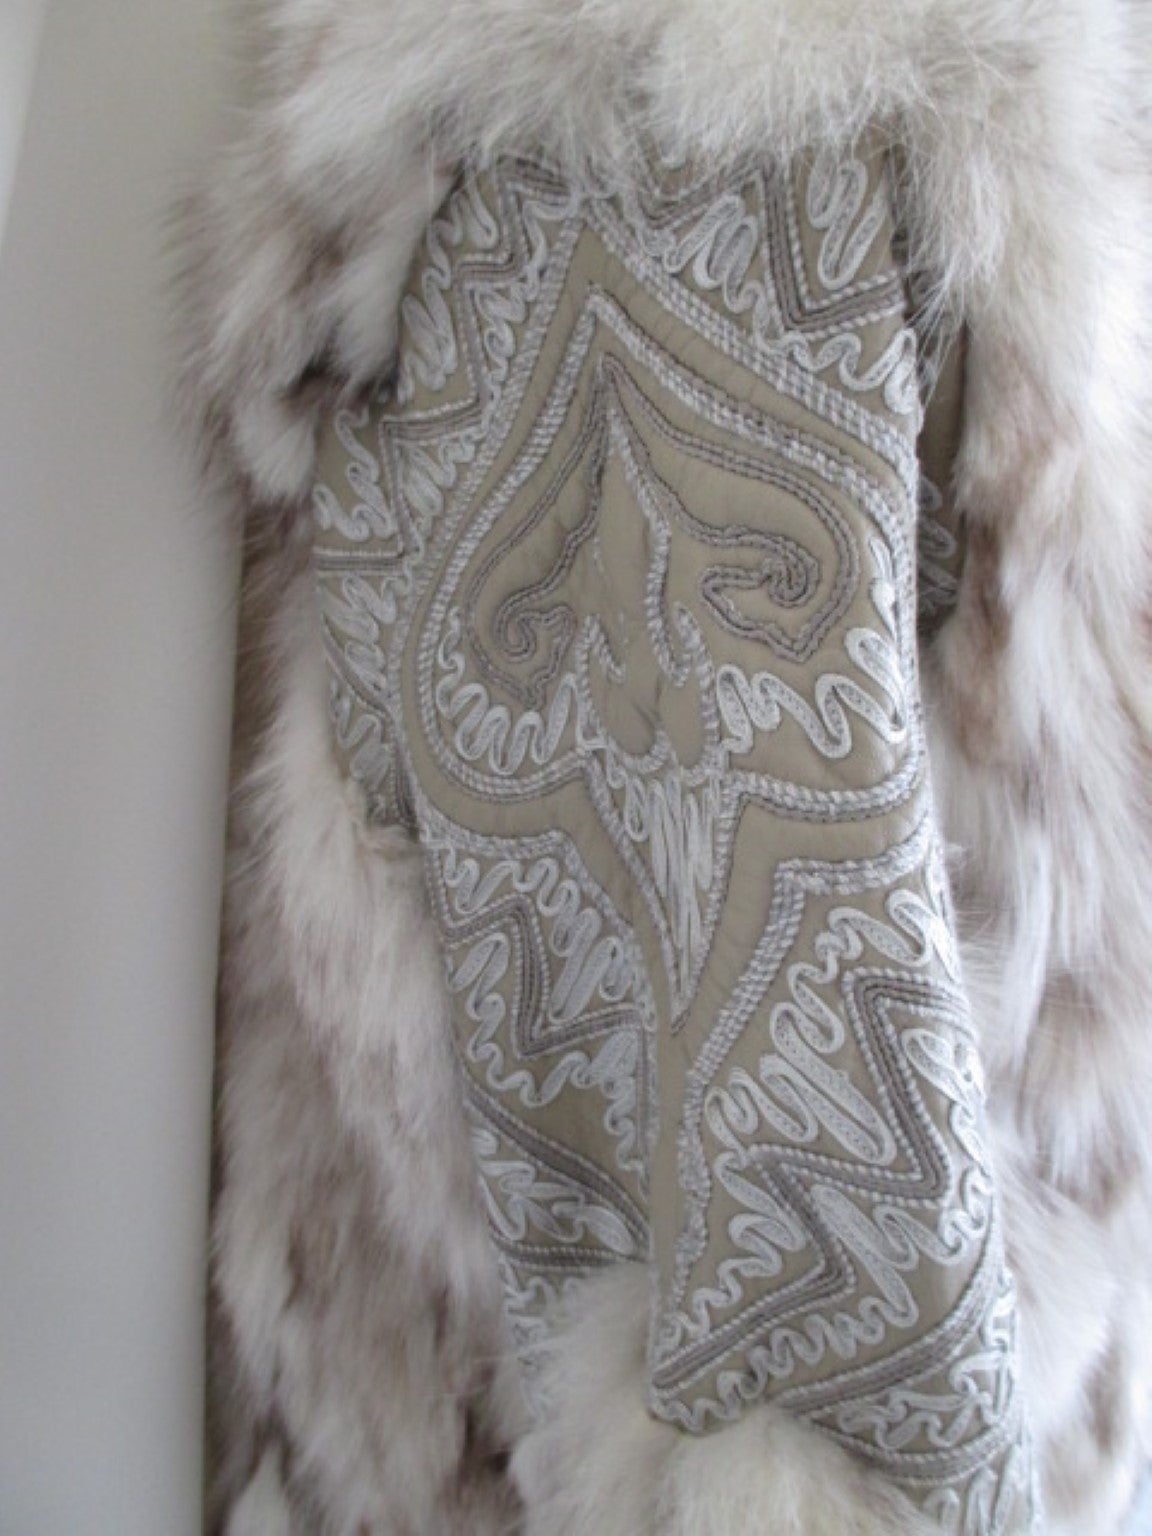 Gray Arianna Firenze Apres-ski Fox fur jacket with embroidered leather